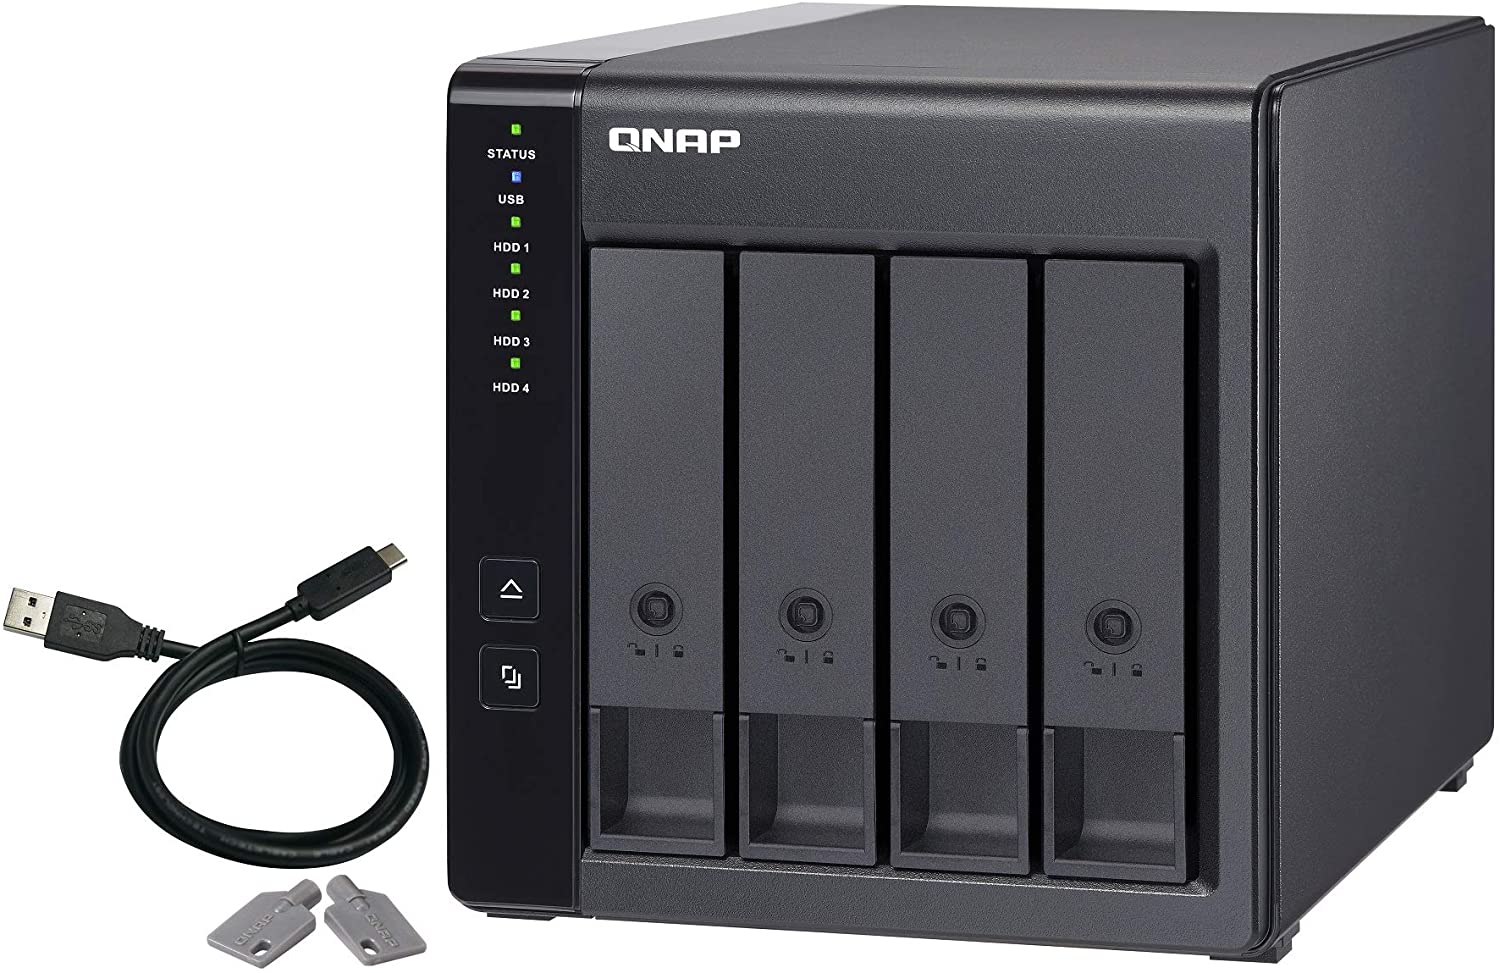 QNAP TR-004 Review - Recycle Those Old Drives